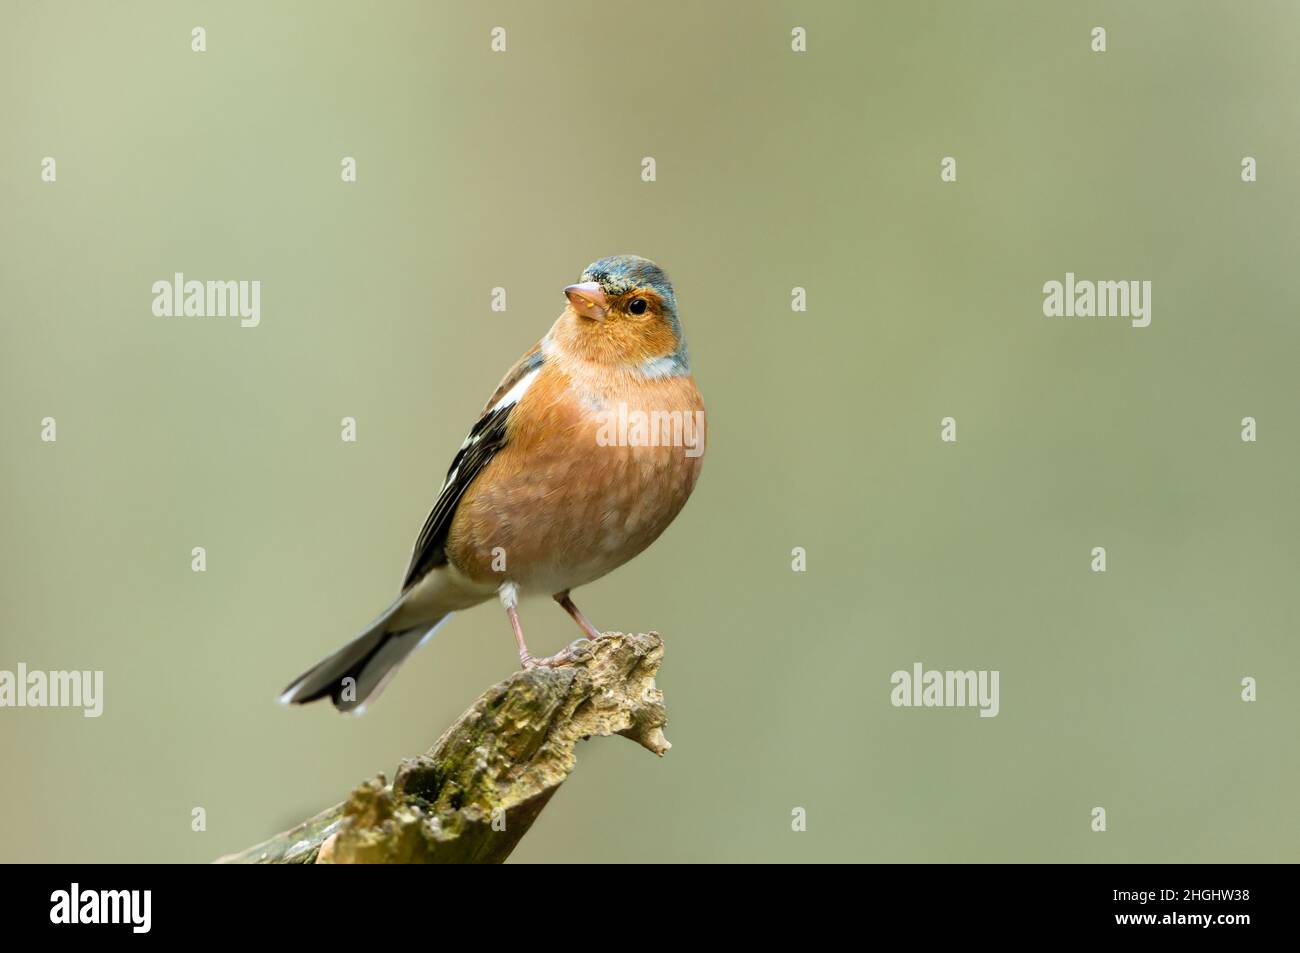 Close up of a male Chaffinch perched on a broken branch and facing forwards in winter.  Scientific name: Fringilla coelebs.  Clean, green background. Stock Photo